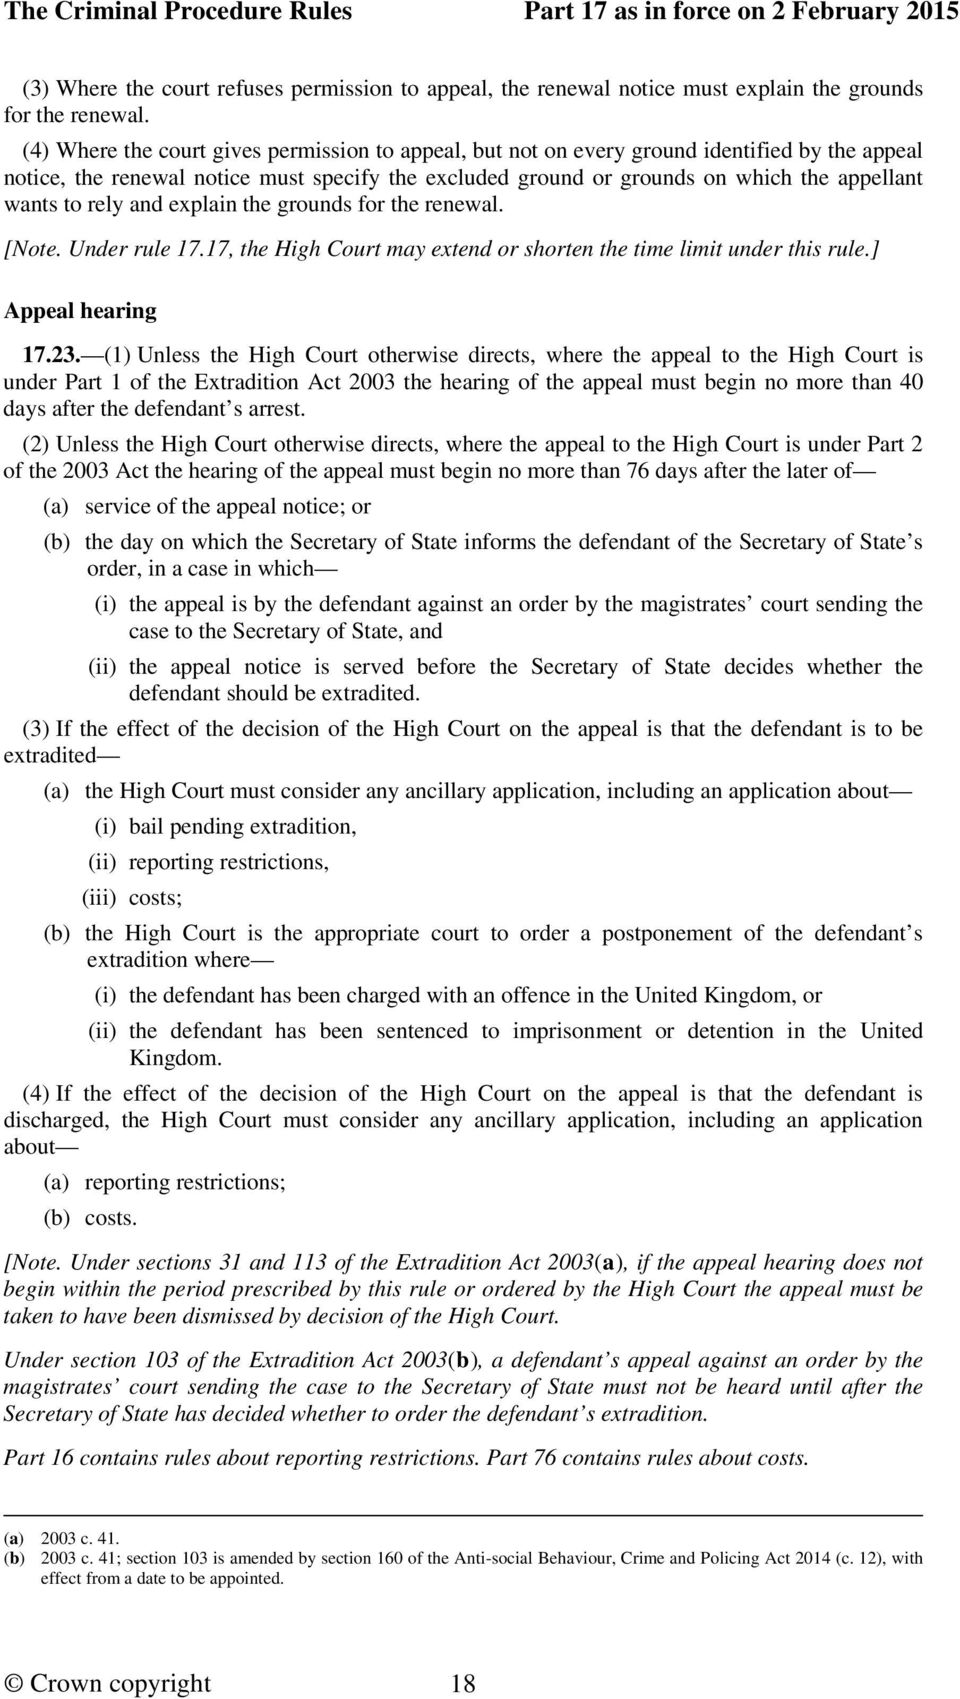 rely and explain the grounds for the renewal. [Note. Under rule 17.17, the High Court may extend or shorten the time limit under this rule.] Appeal hearing 17.23.